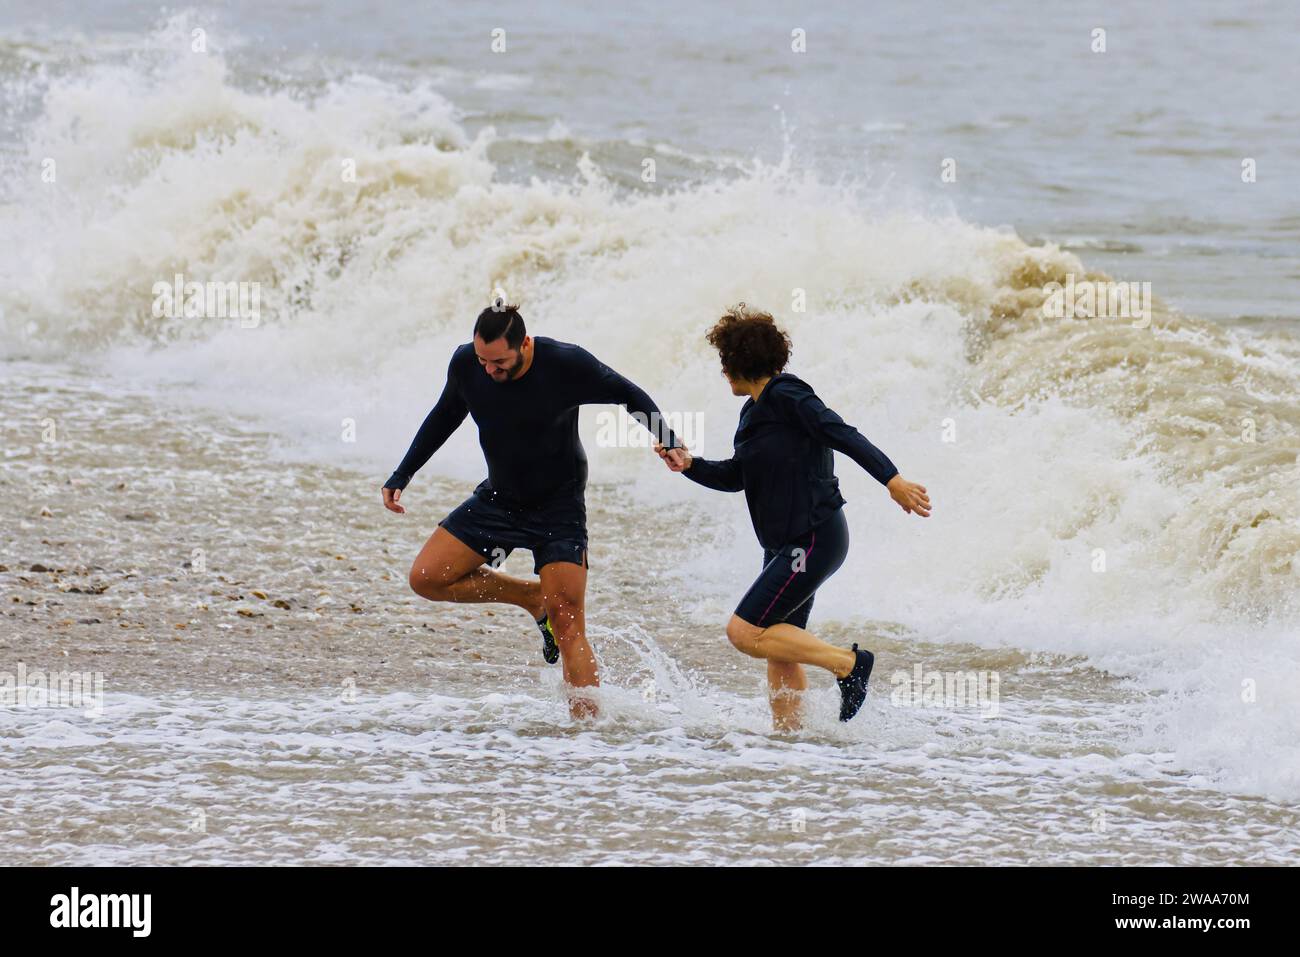 Number 1 in a sequence of 4: swimming at Avon Beach, Mudeford, Christchurch, Dorset on New Year's Day Stock Photo